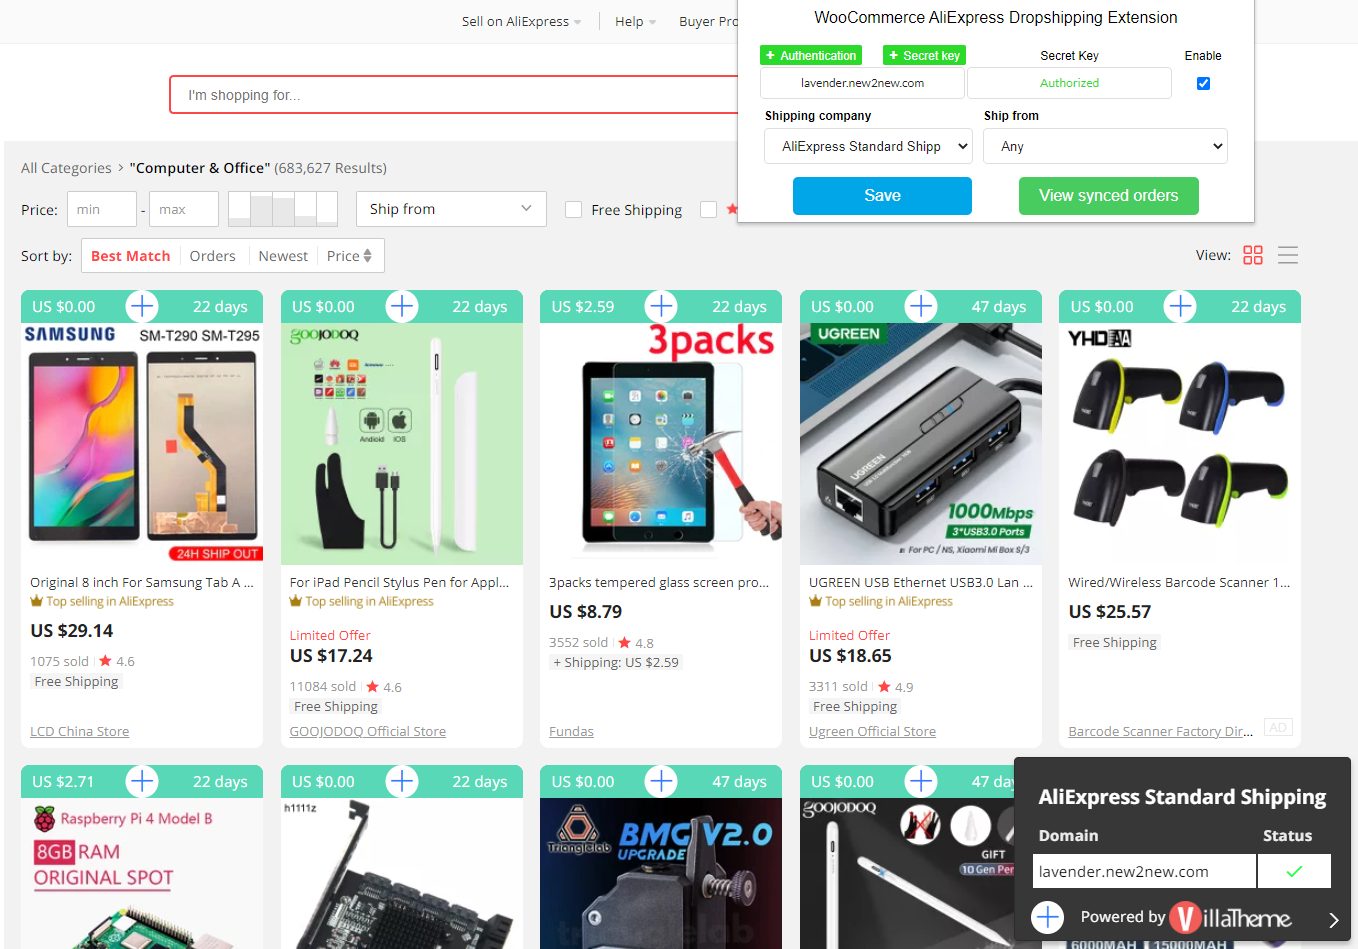 Search for AliExpress products to import to WooCommerce